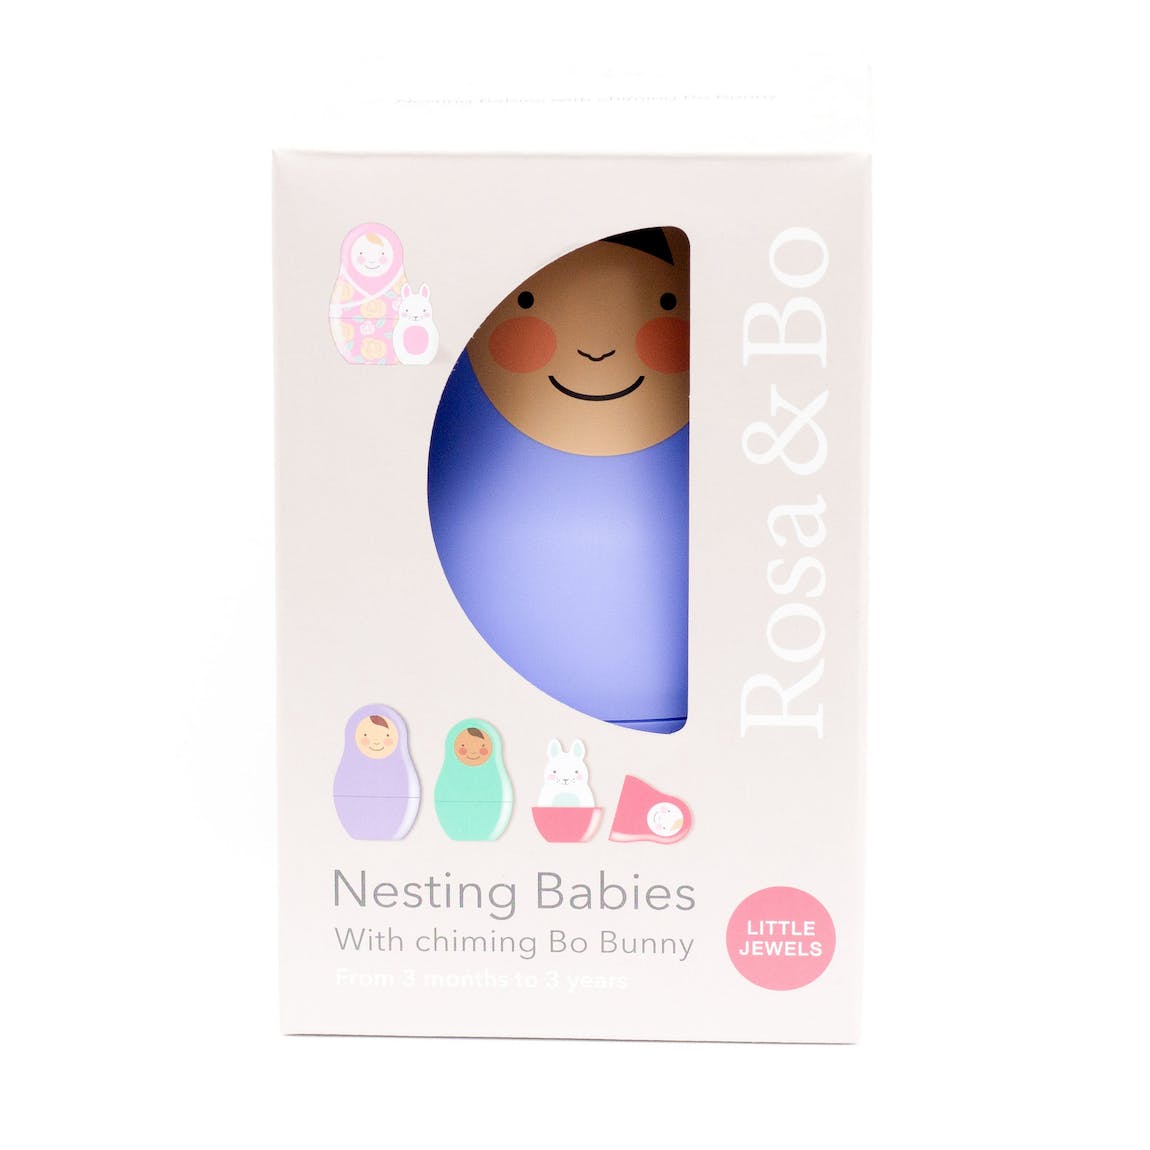 Little Jewels Nesting Babies with Chiming Bo Bunny